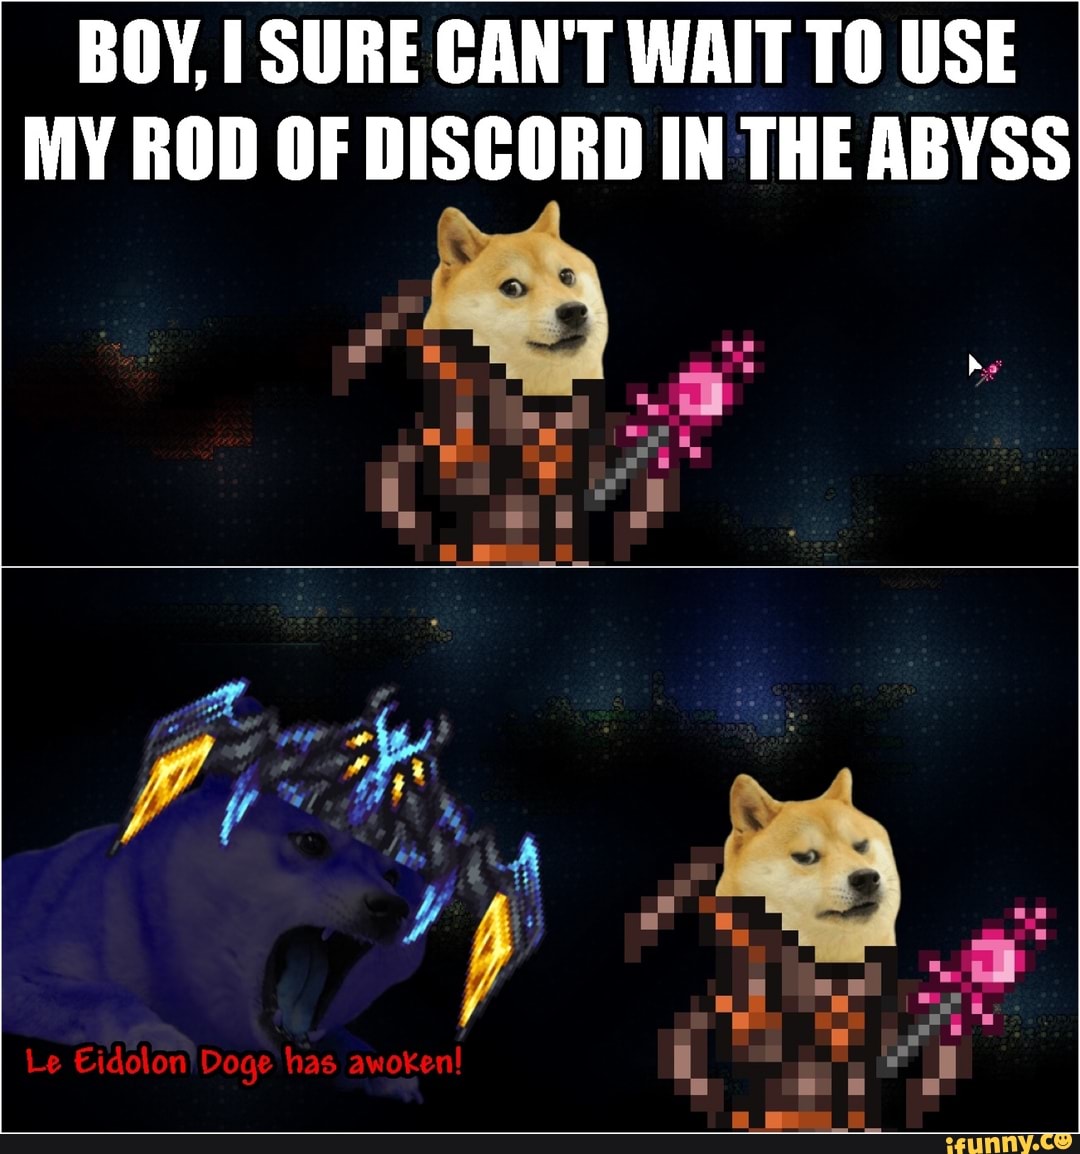 BOY, SURE CAN'T WAIT USE MY ROD OF DISCORD IN THE ABYSS Le Gidolon Doge has  awoken! he - iFunny Brazil